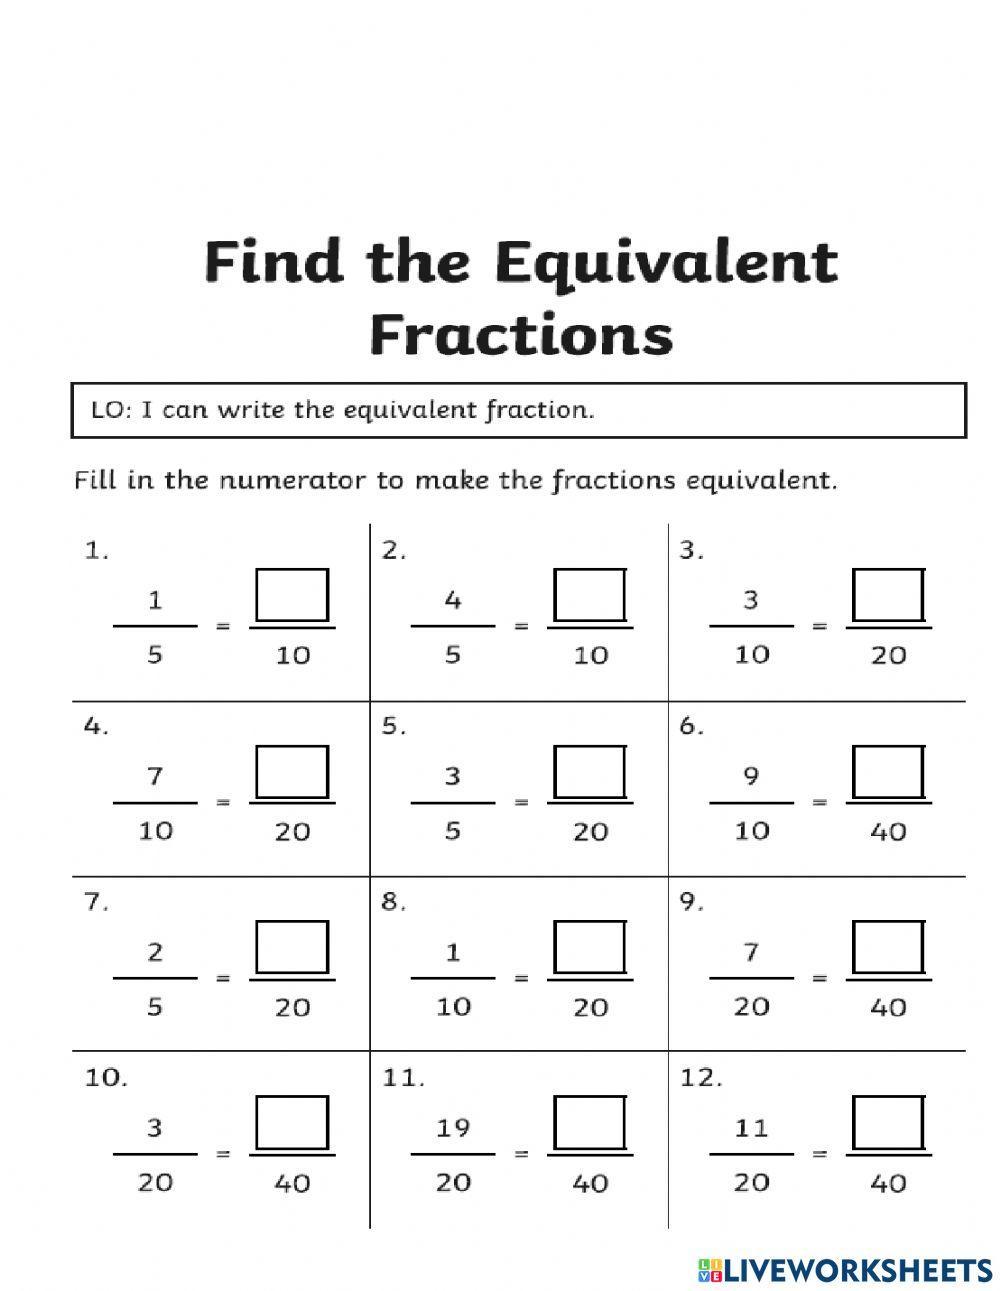 Equivalent fractions finding the missing number